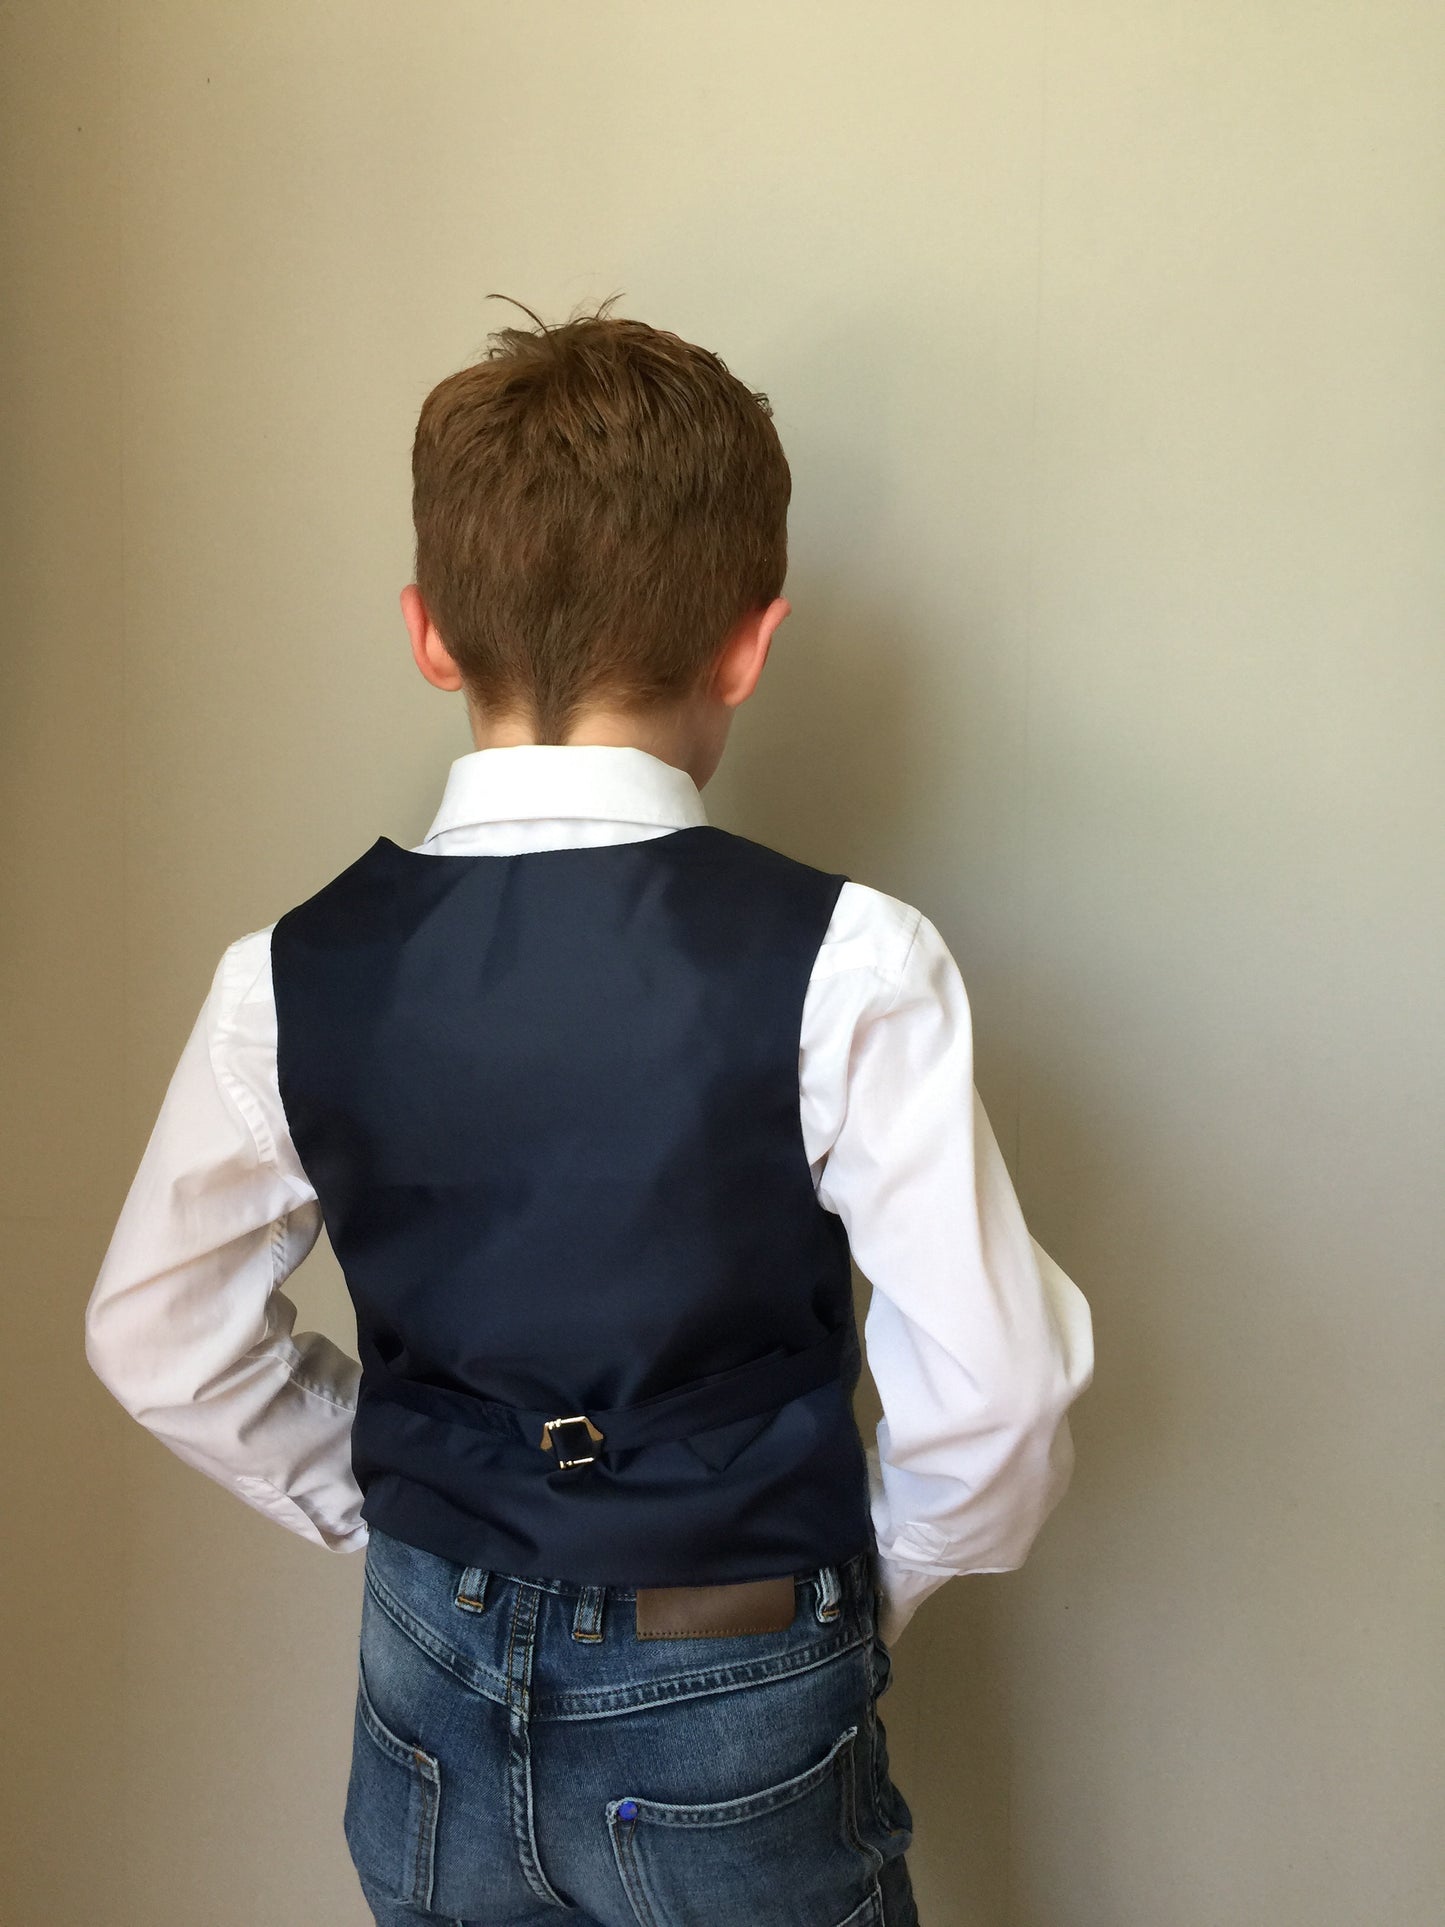 Boys waistcoat, British Tweed waistcoat, pageboy outfit, boys clothing, blue with dark blue over check waistcoat - earl of grantham